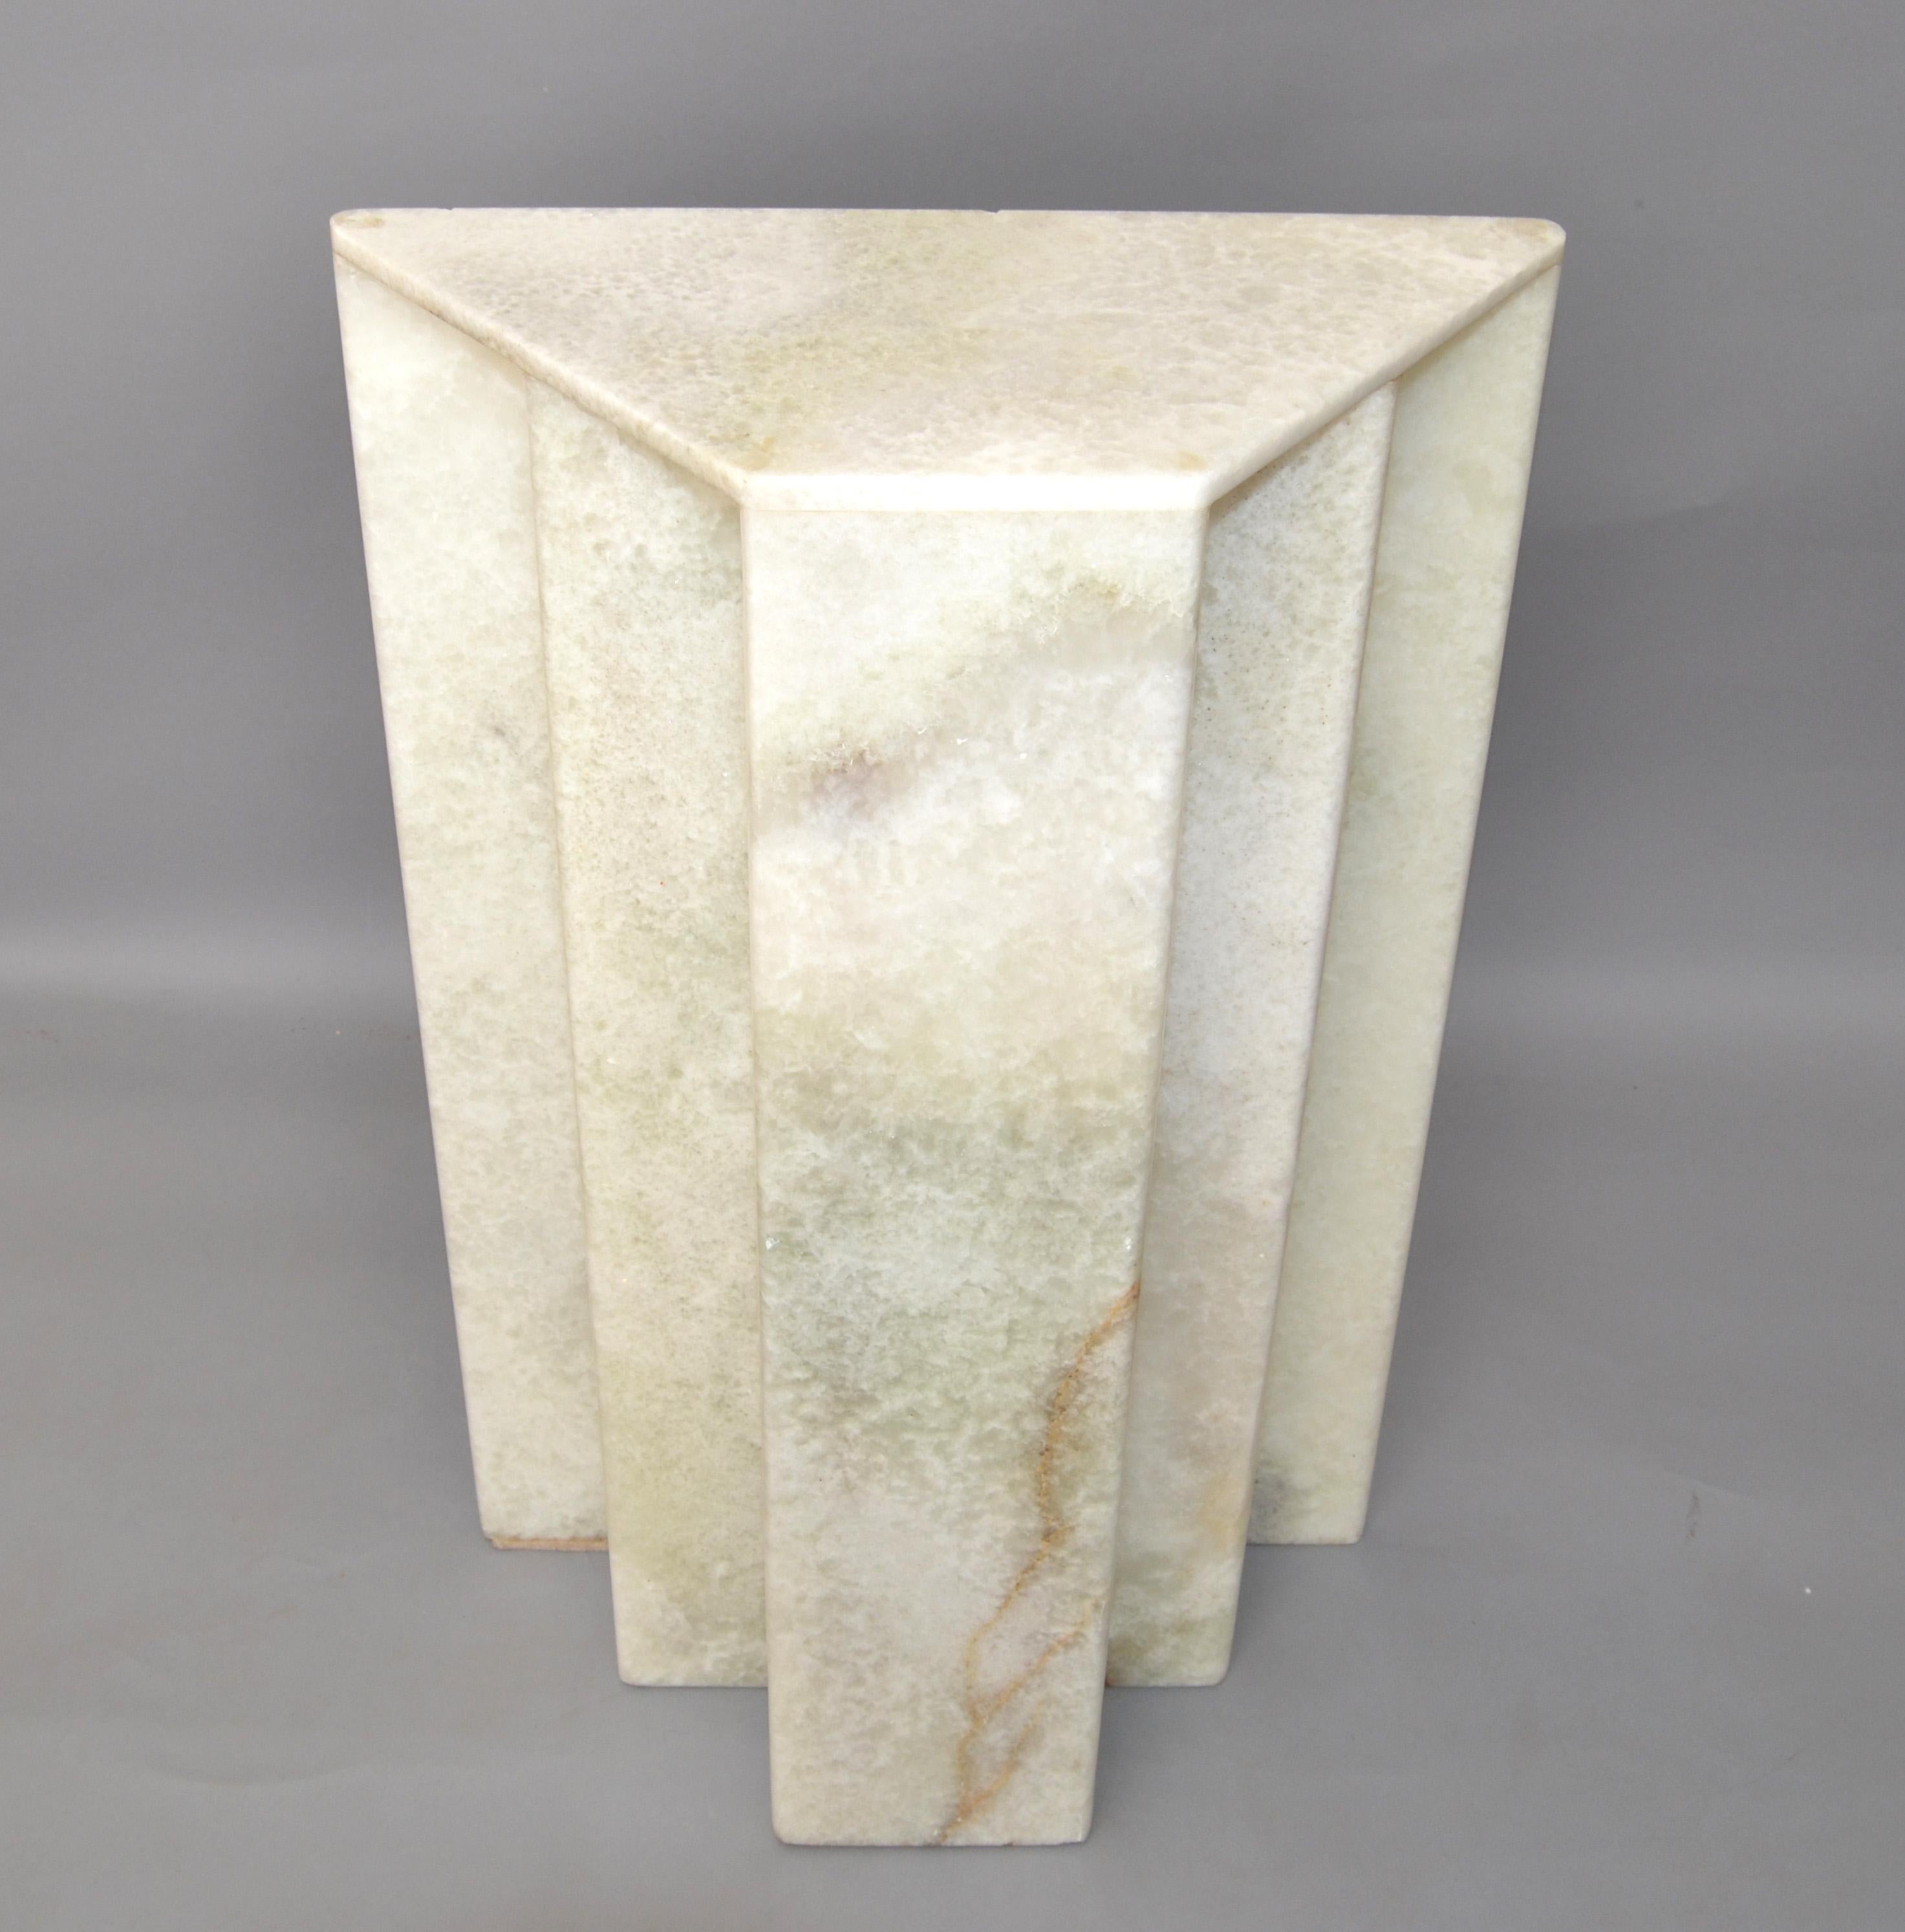 Hand-Crafted Art Deco White Tan Alabaster Skyscraper Style Console Table Base Pedestal Column For Sale